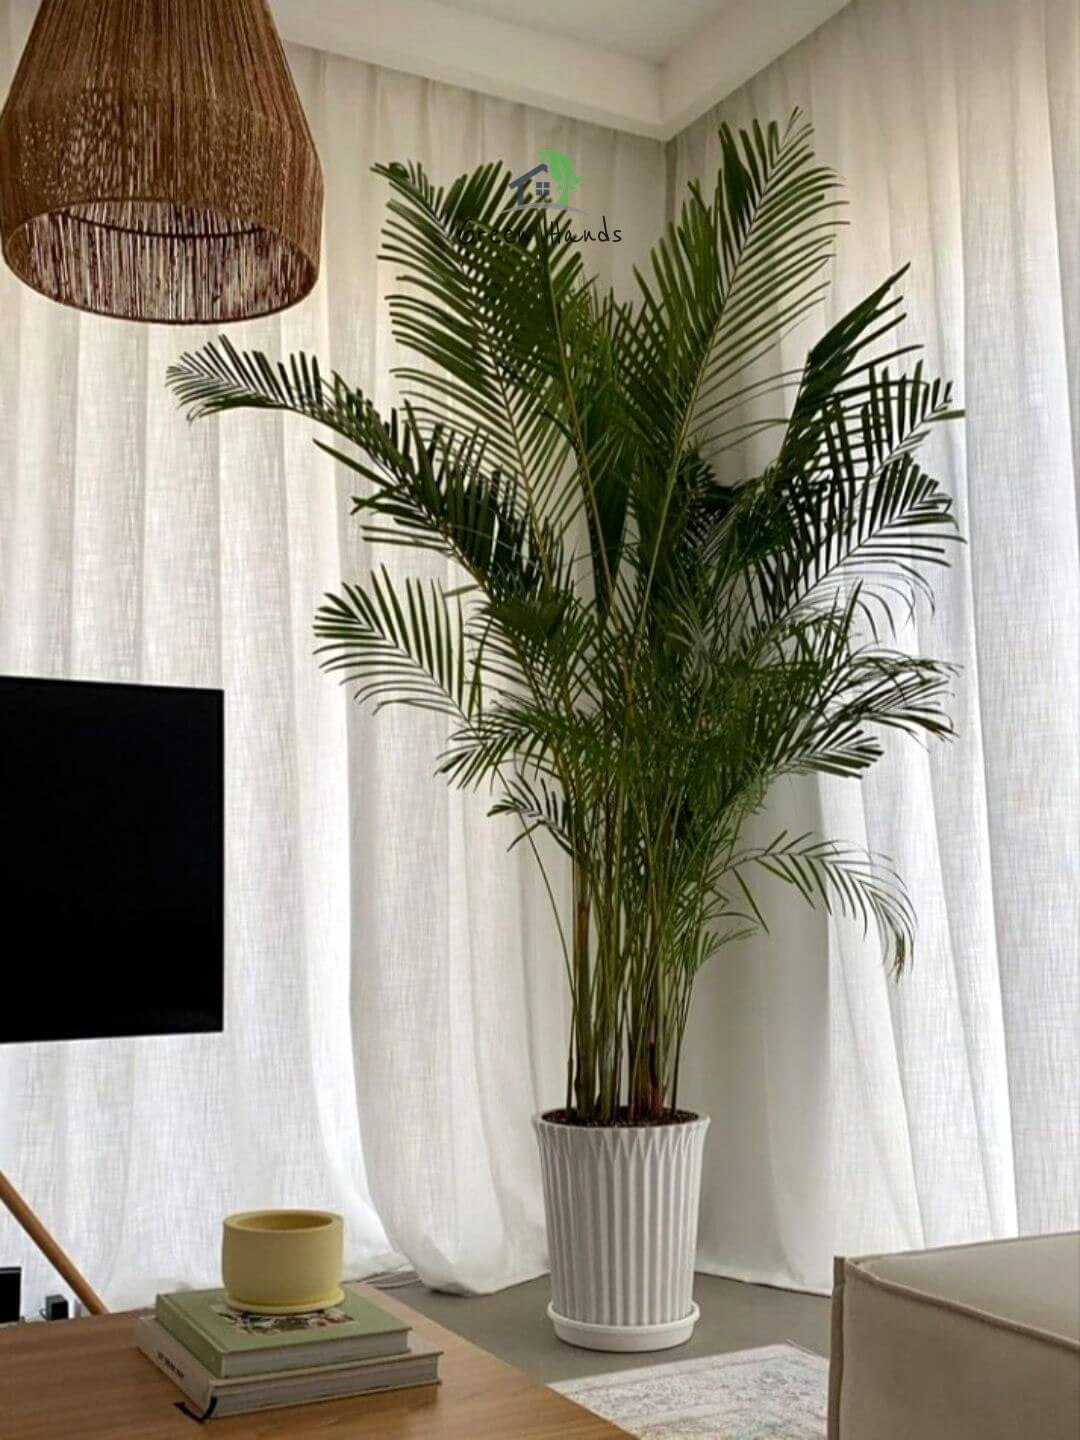 XXL Areca Palms in Dubai and UAE: The Ultimate Air Purifier